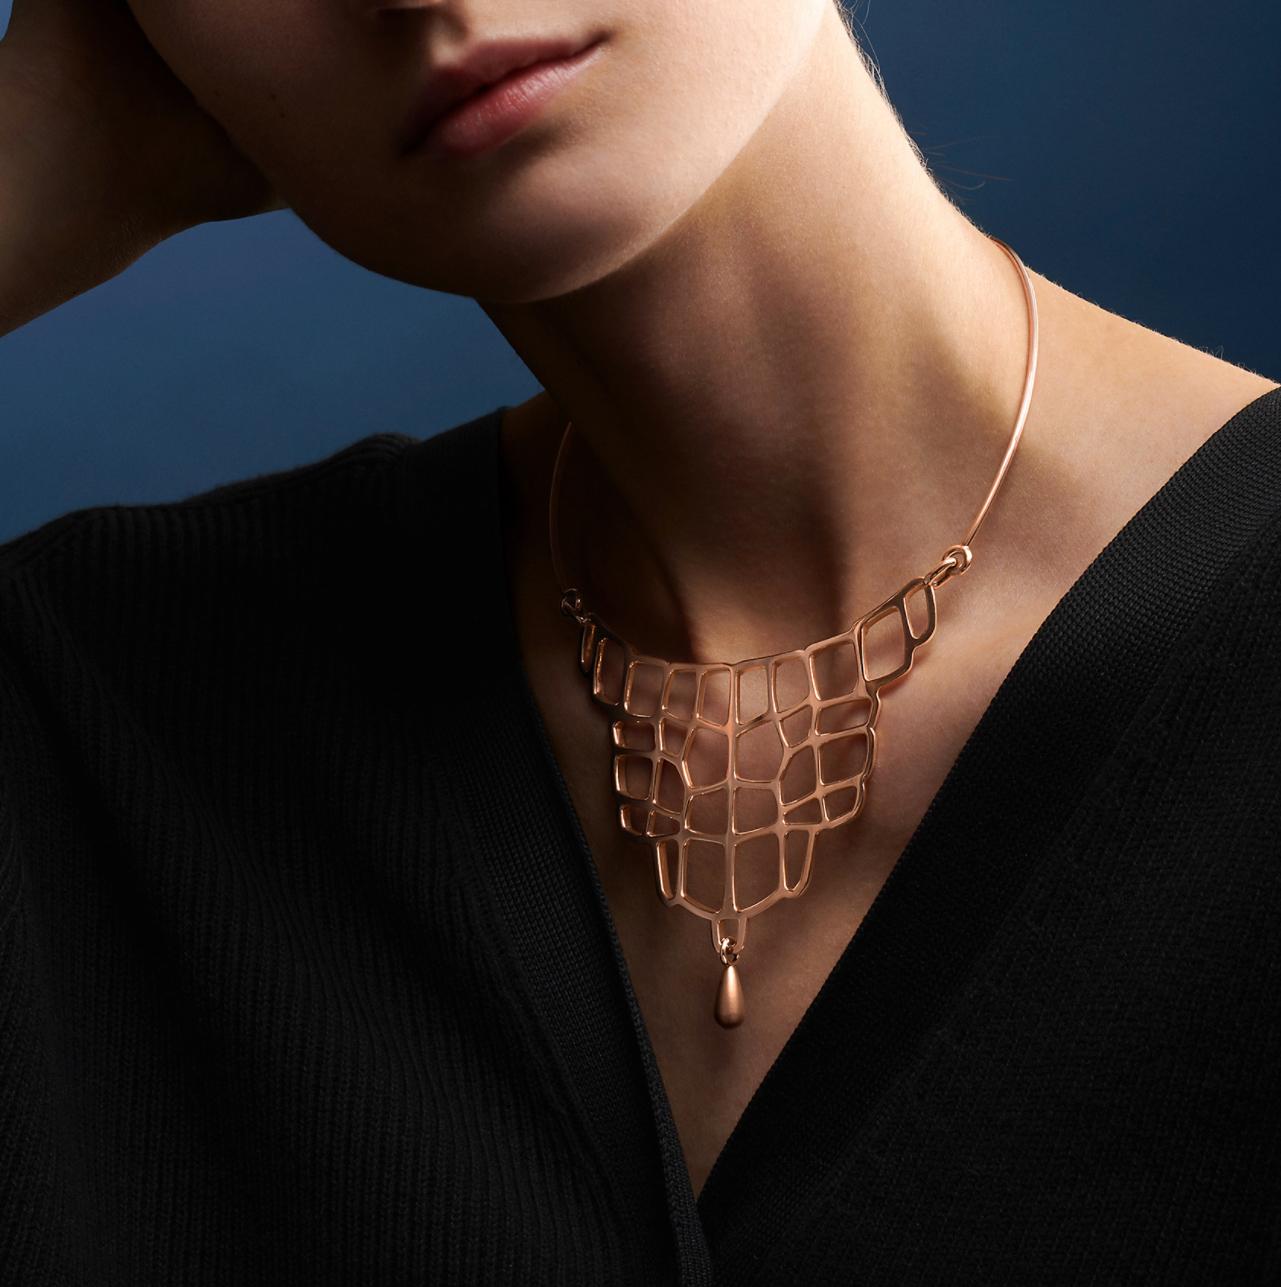 The Niloticus story is inspired by the Nile crocodile (Crocodylus niloticus) in a detailed and precious interpretation of an animal skin. Here, a supple chain in rose gold composed of articulated scales forms beautiful and fascinating patterns.